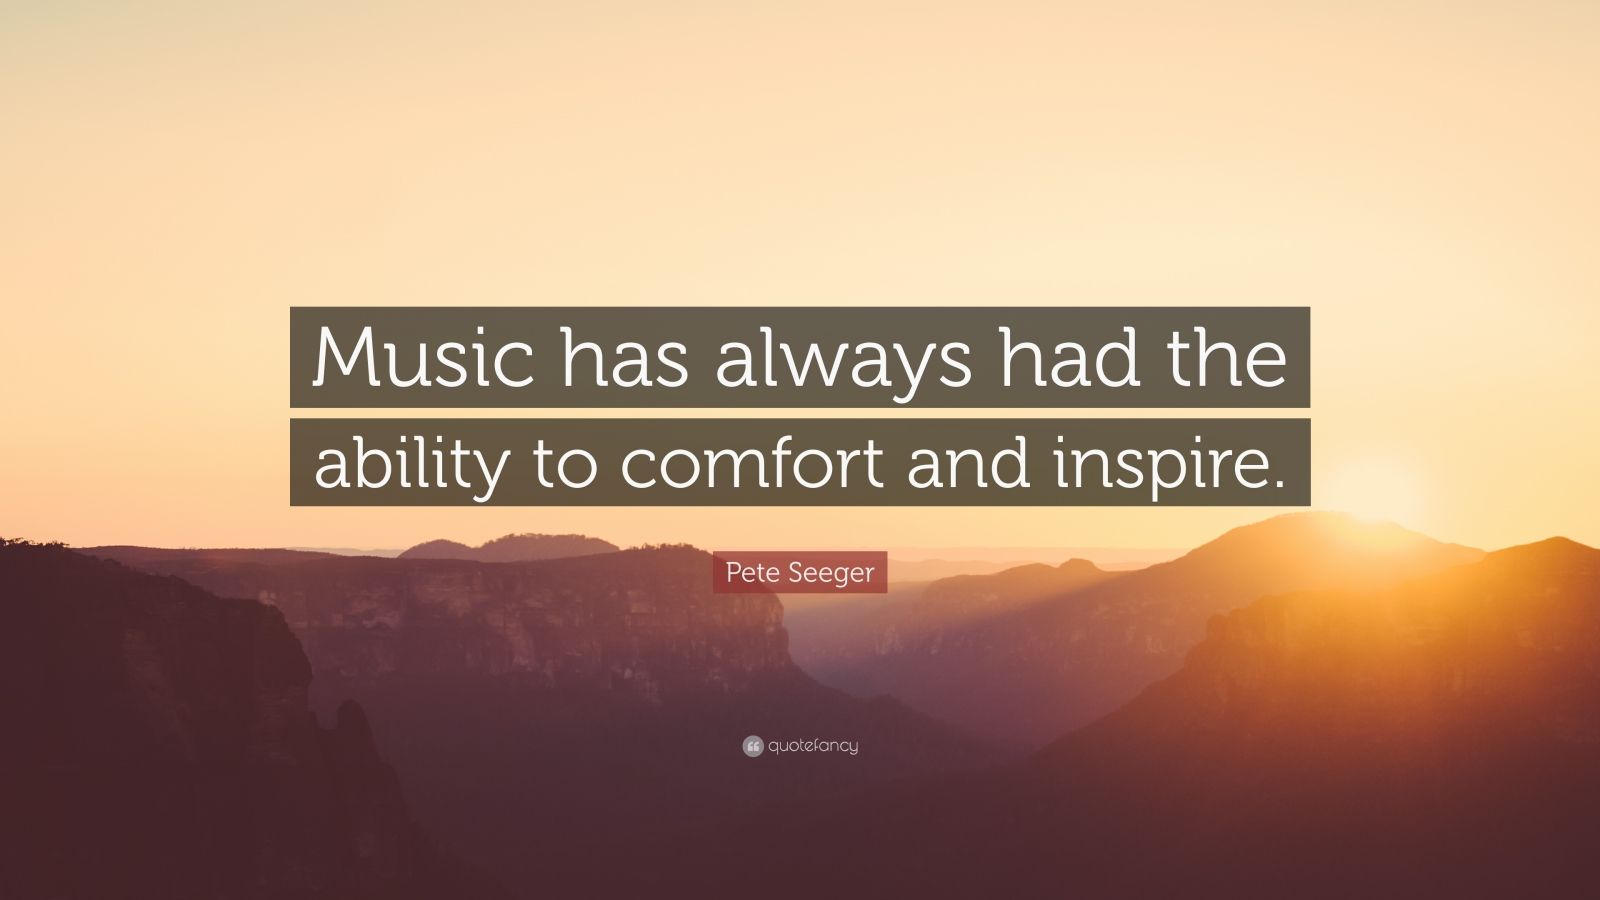 quotes about listening to music to spirit